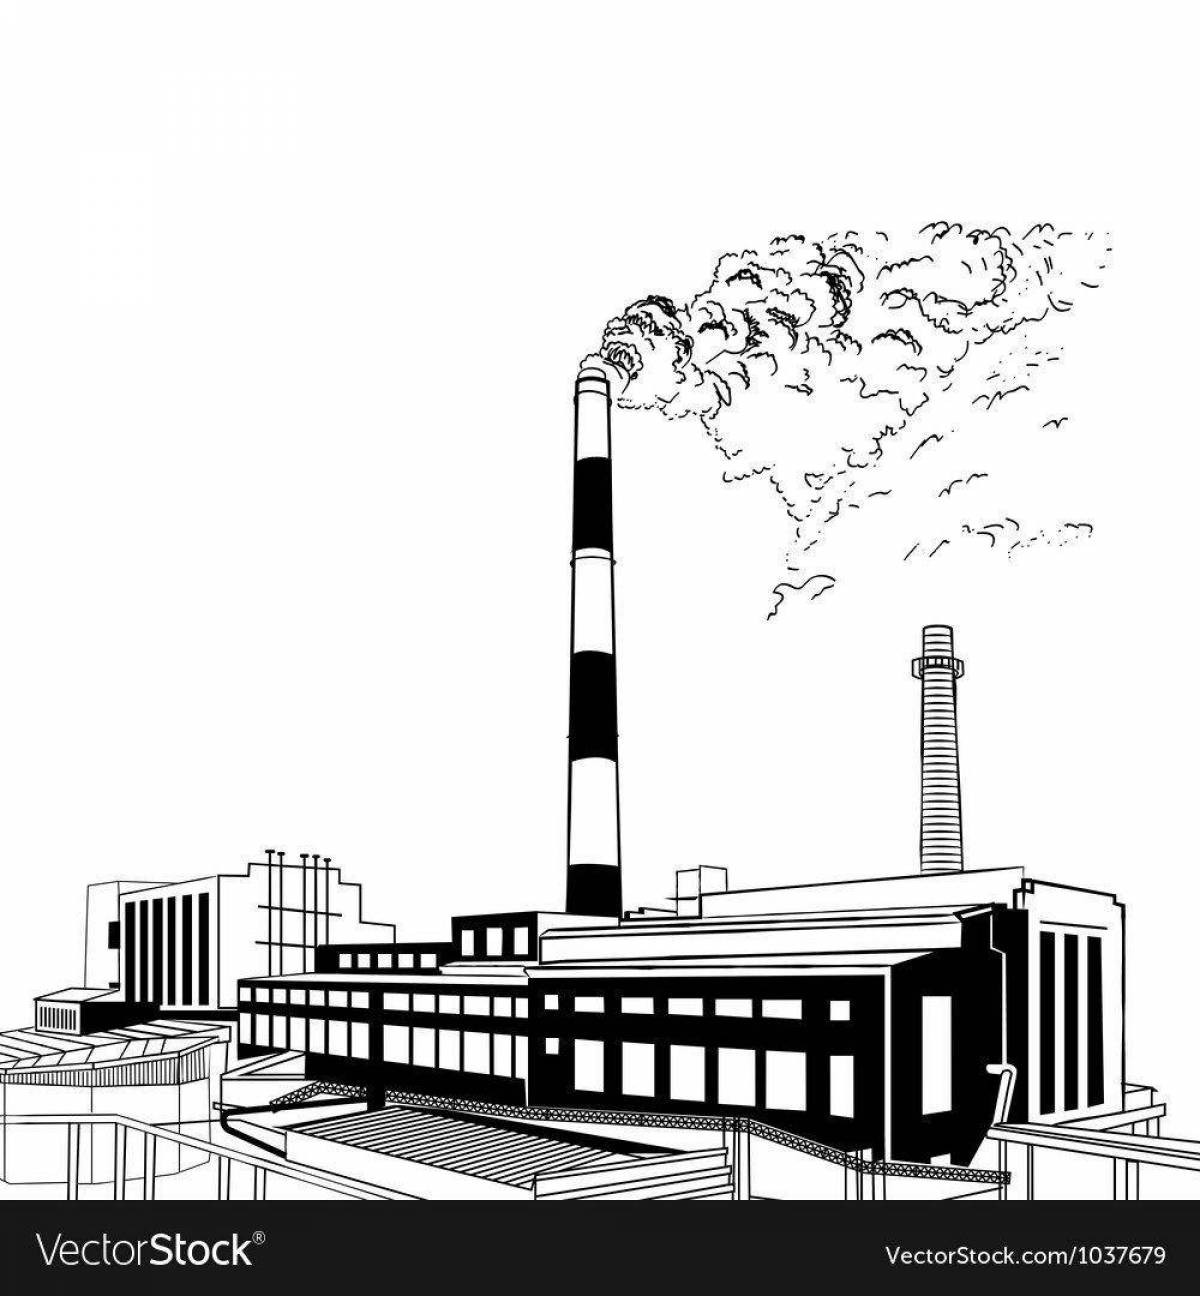 Attractive power plant coloring page